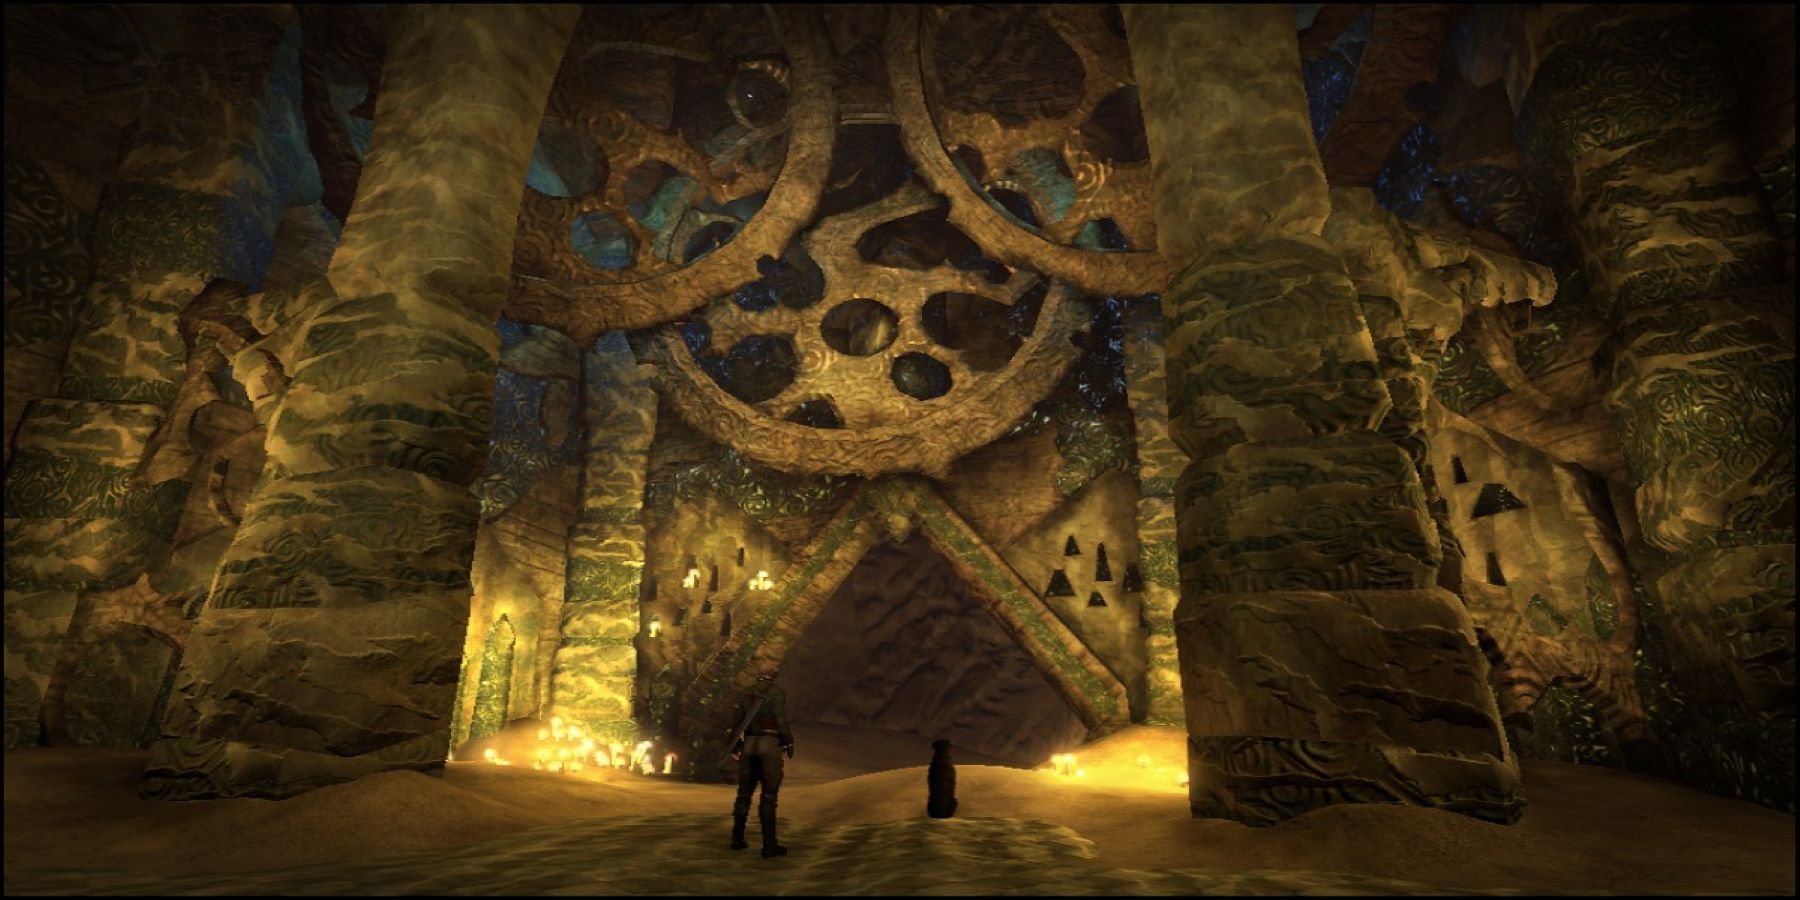 The Hero of Brightwall and their dog looking up at an ancient structure in Aurora in Fable 3